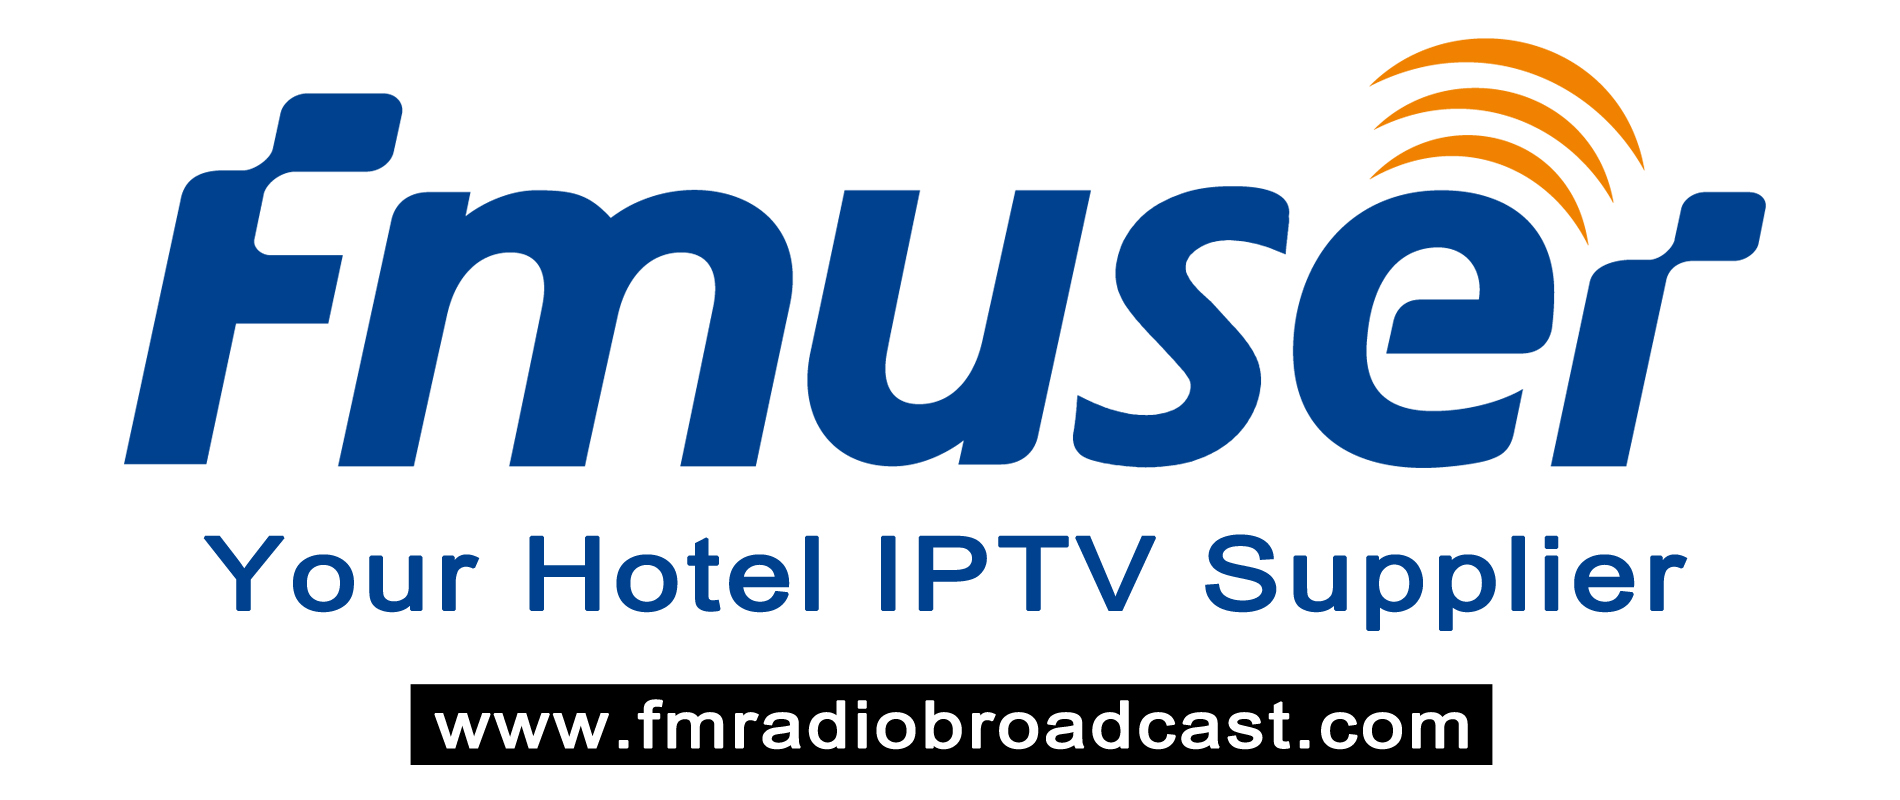 FMUSER's Technical Excellence in Hotel IPTV Systems for Dhahran's Hospitality Industry